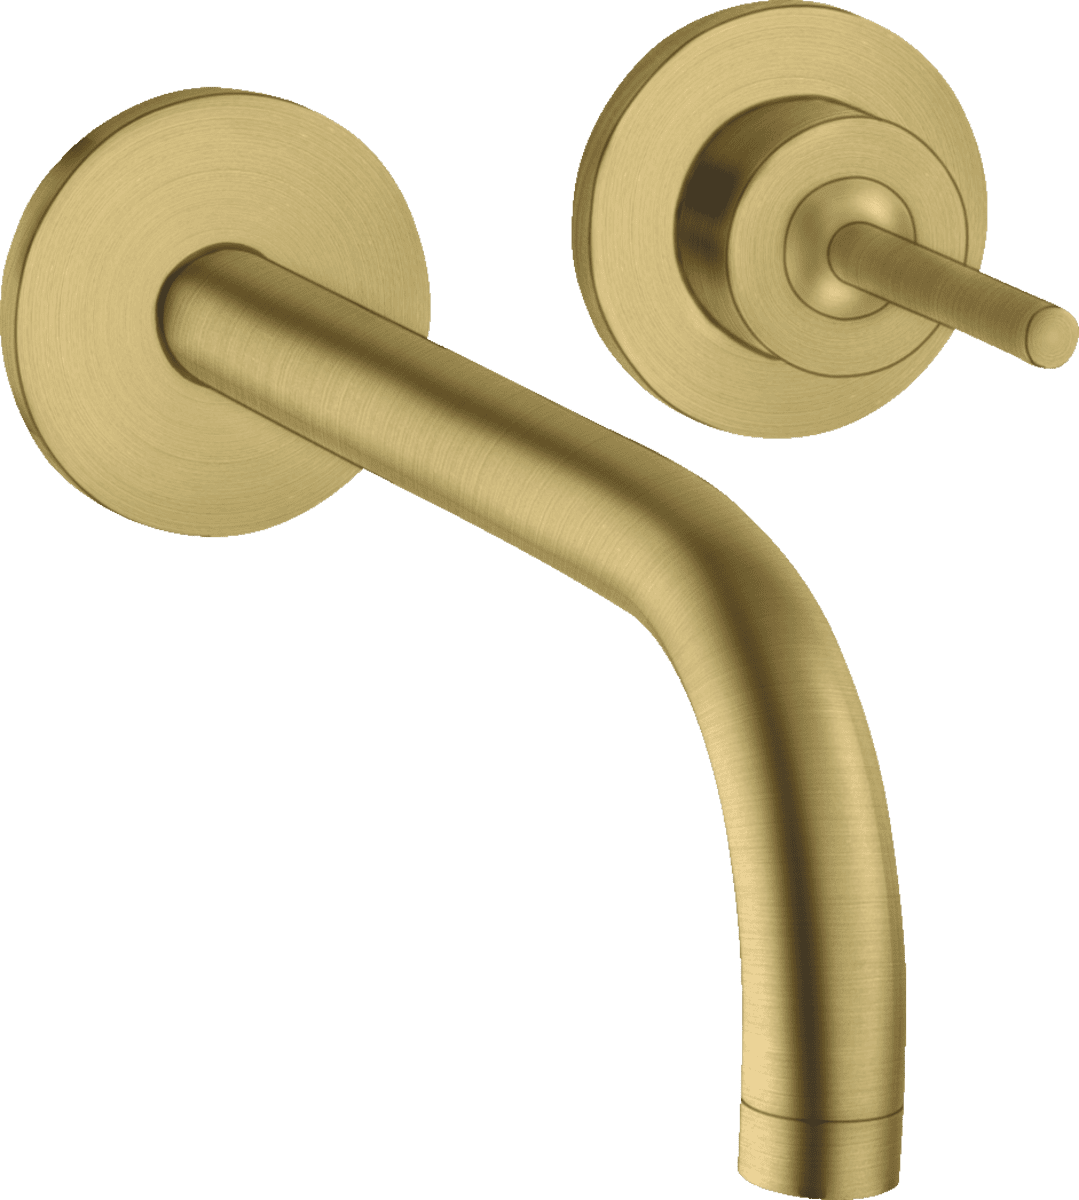 Picture of HANSGROHE AXOR Uno Single lever basin mixer for concealed installation wall-mounted with spout 165 mm and escutcheons #38113950 - Brushed Brass